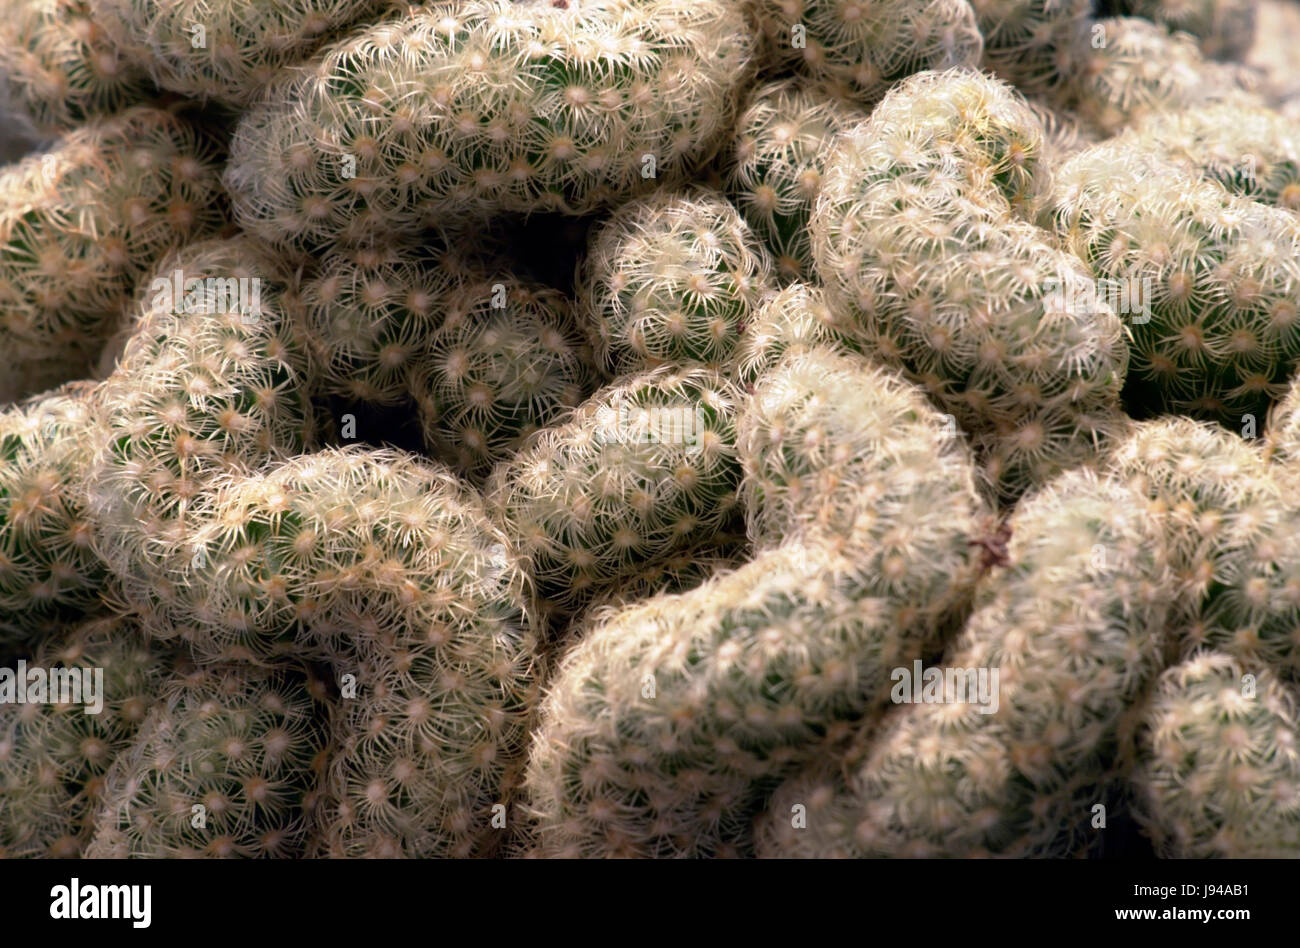 dry, dried up, barren, protect, protection, cactus, prickly, format-filling, Stock Photo